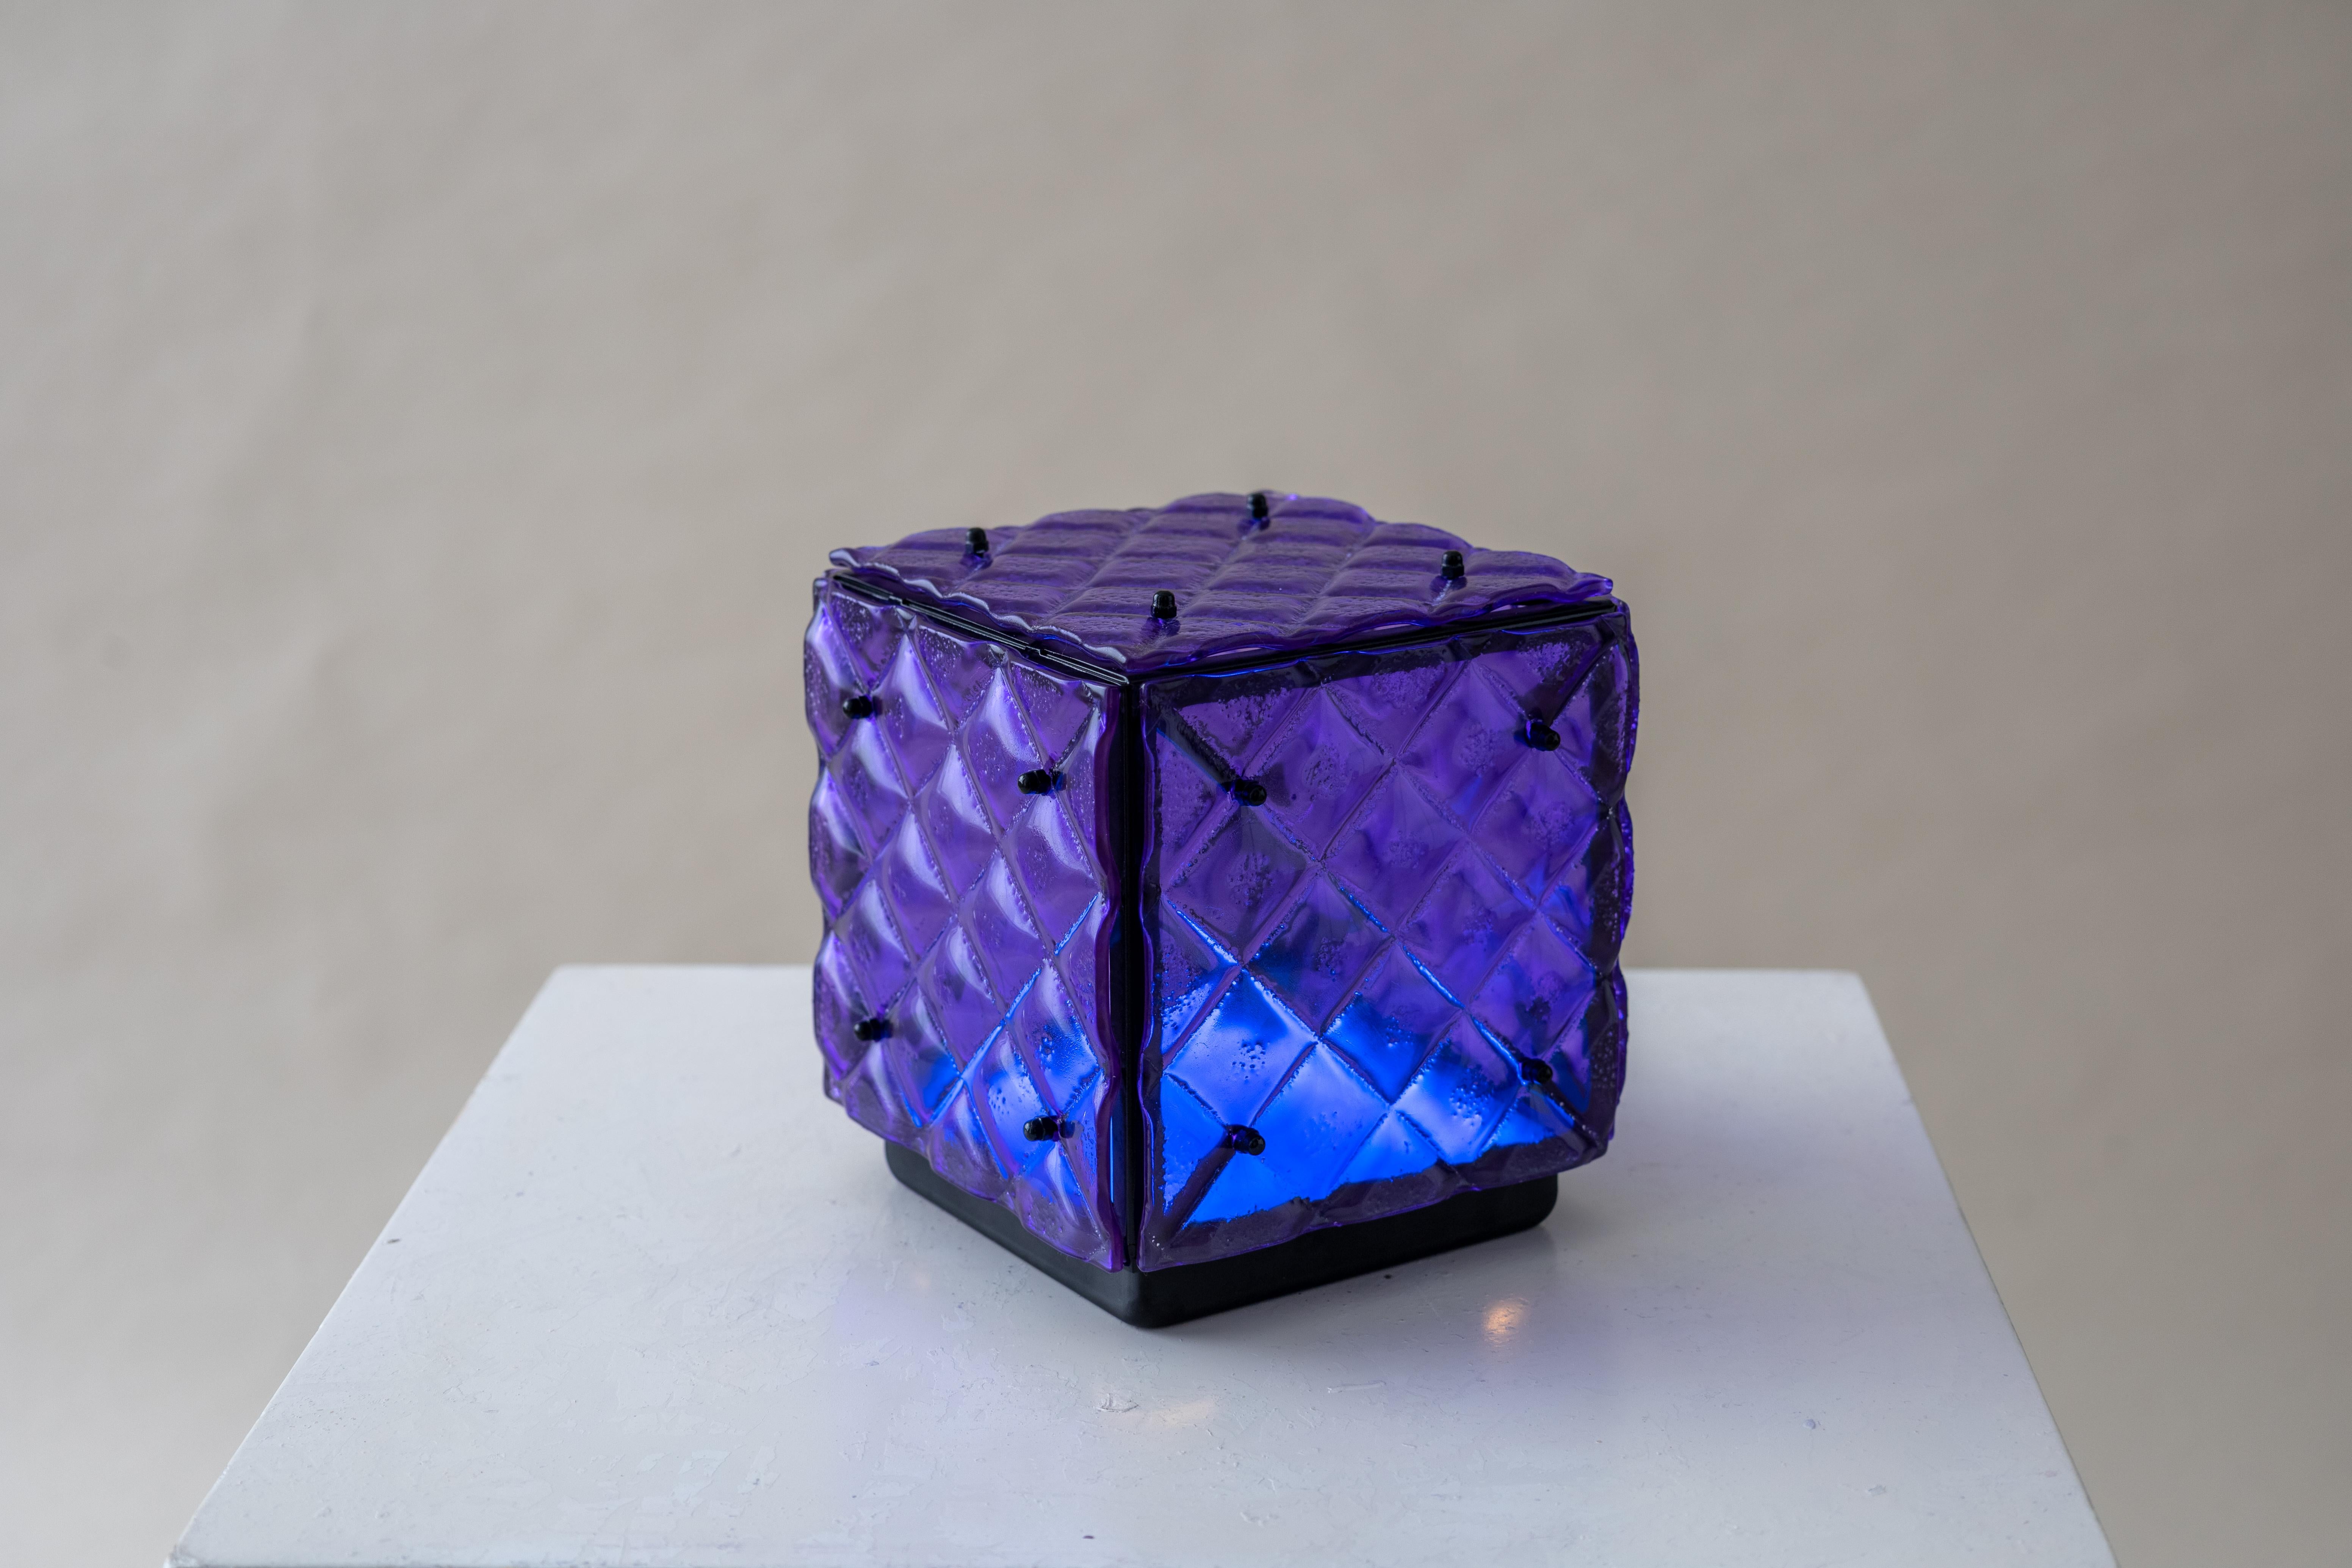 Spanish Glass Cube Lamp Purple Ambient Light Artisanal Fused Glass Contemporary Design For Sale